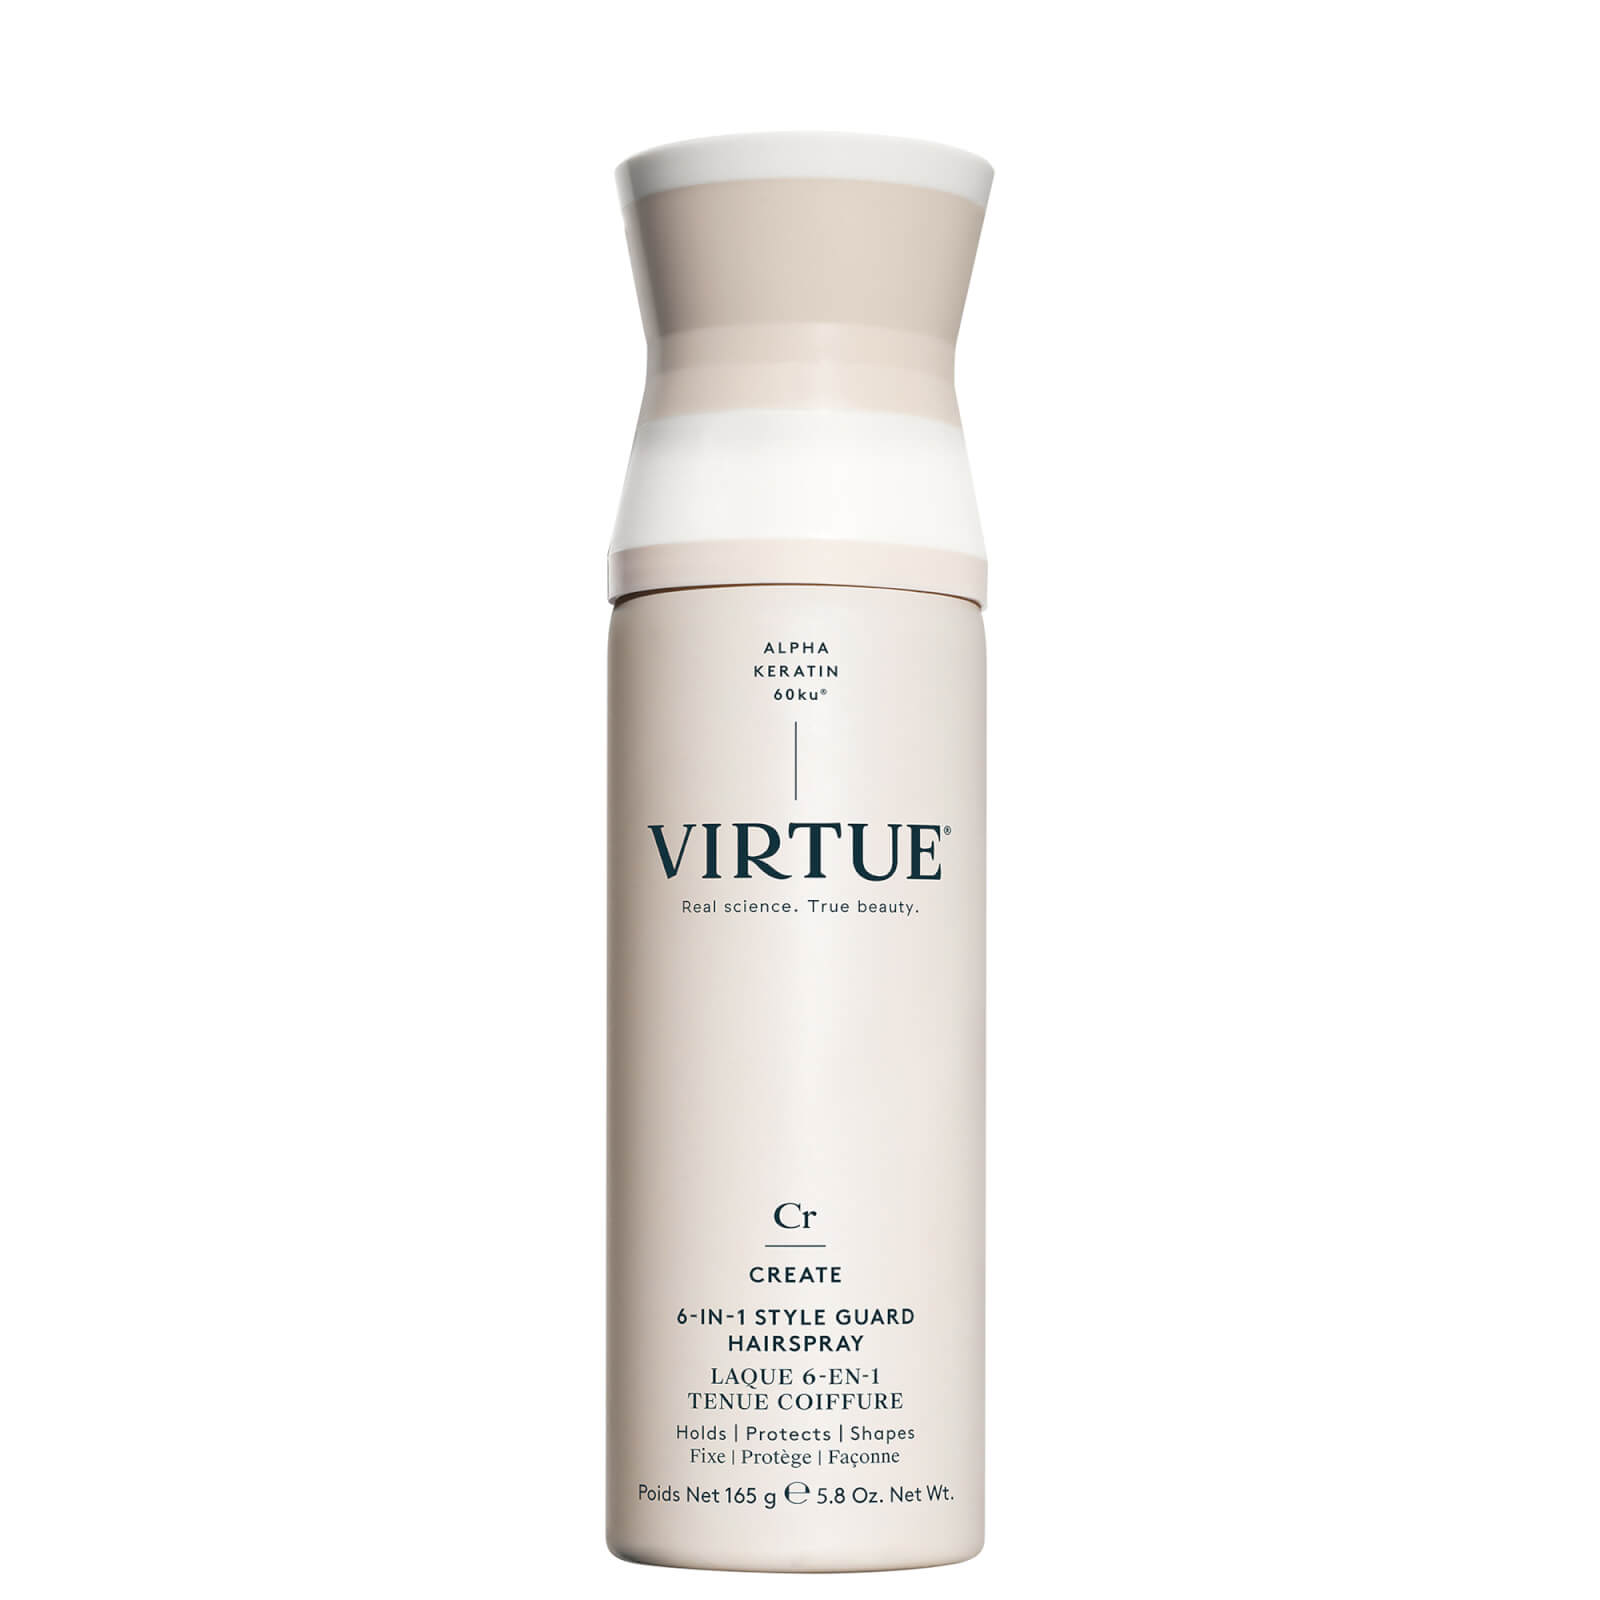 VIRTUE 6-in-1 Hairspray 68g product